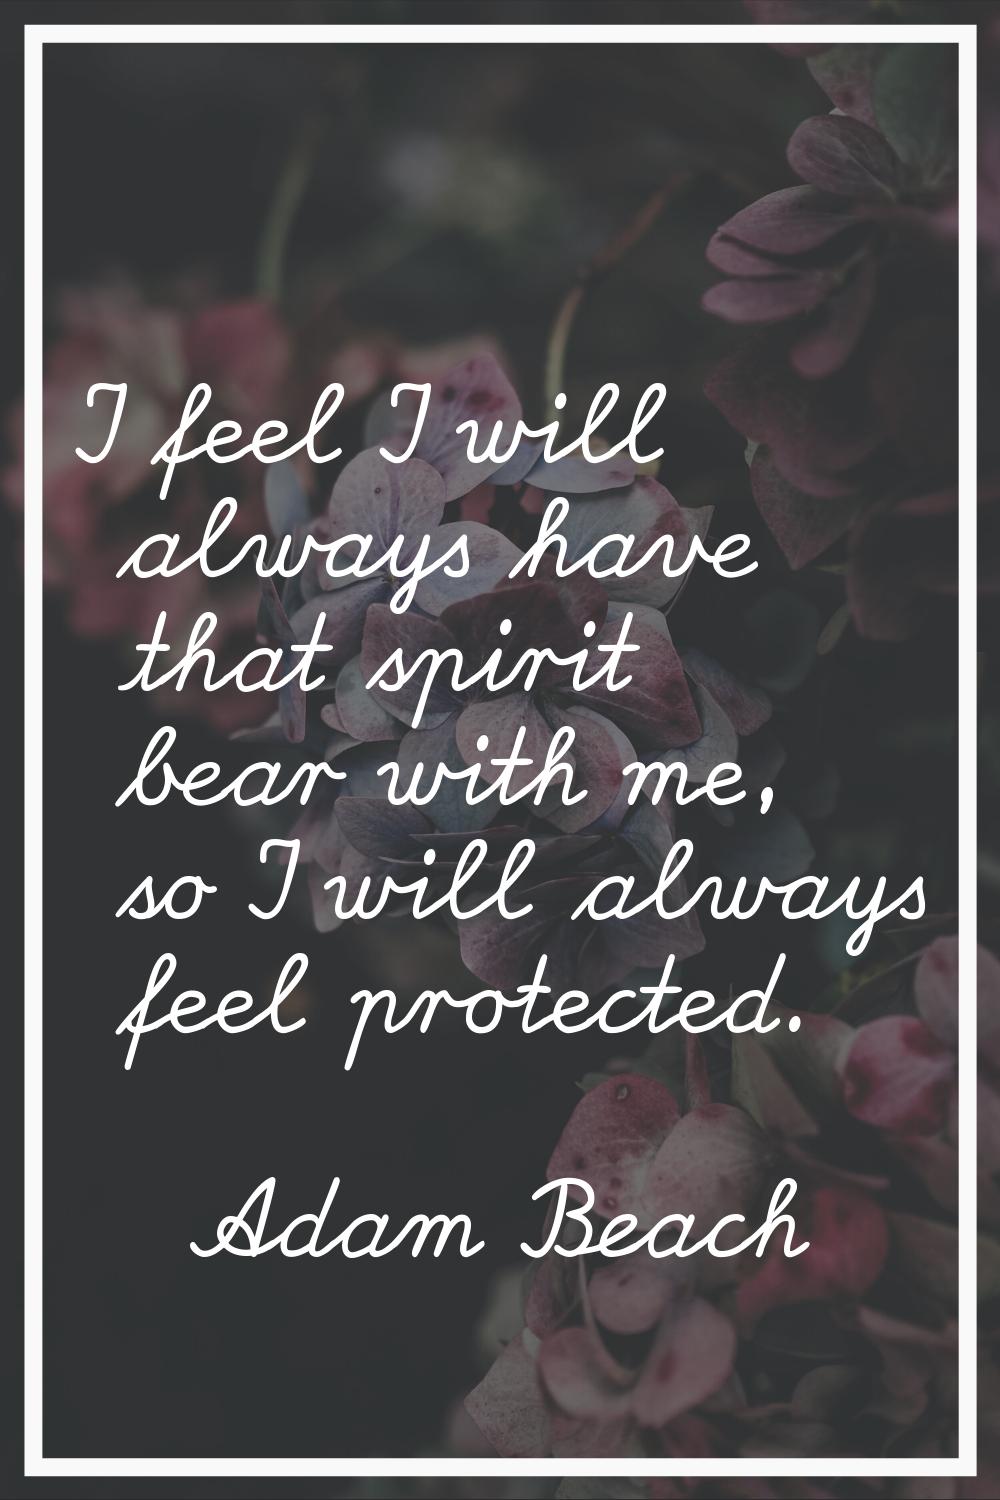 I feel I will always have that spirit bear with me, so I will always feel protected.